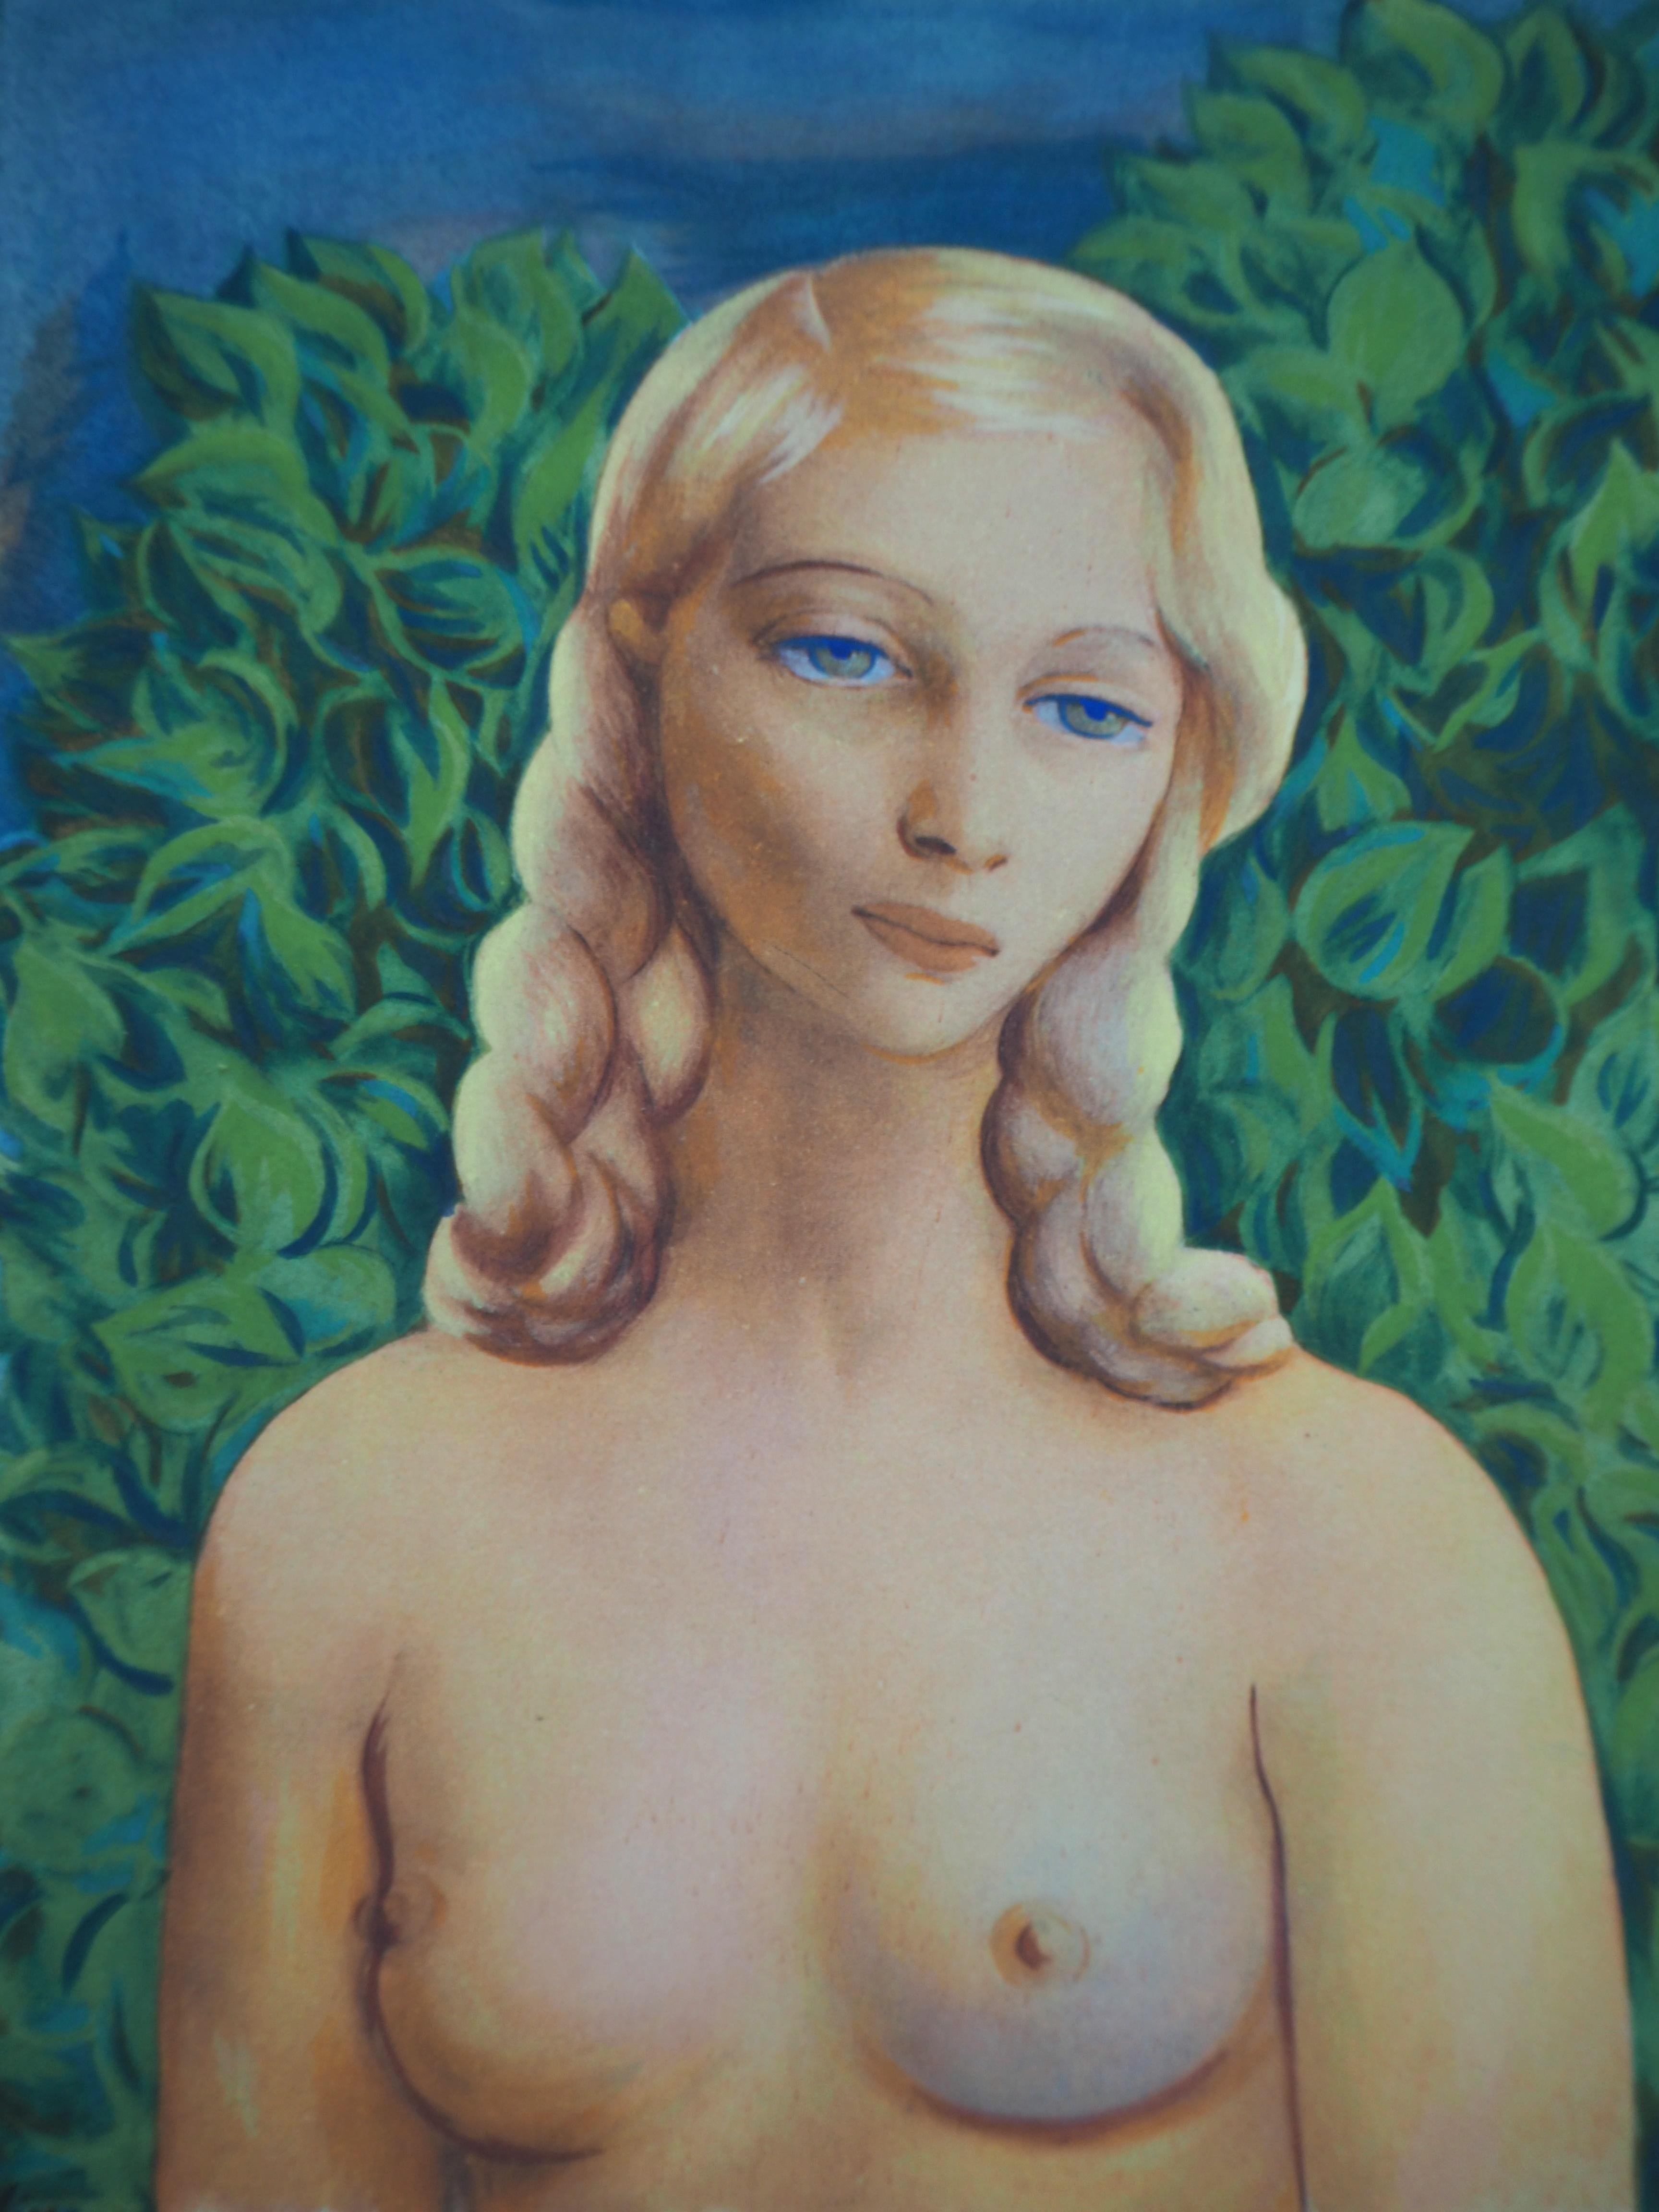 The Blond-haired Young Woman - Original Lithograph 1